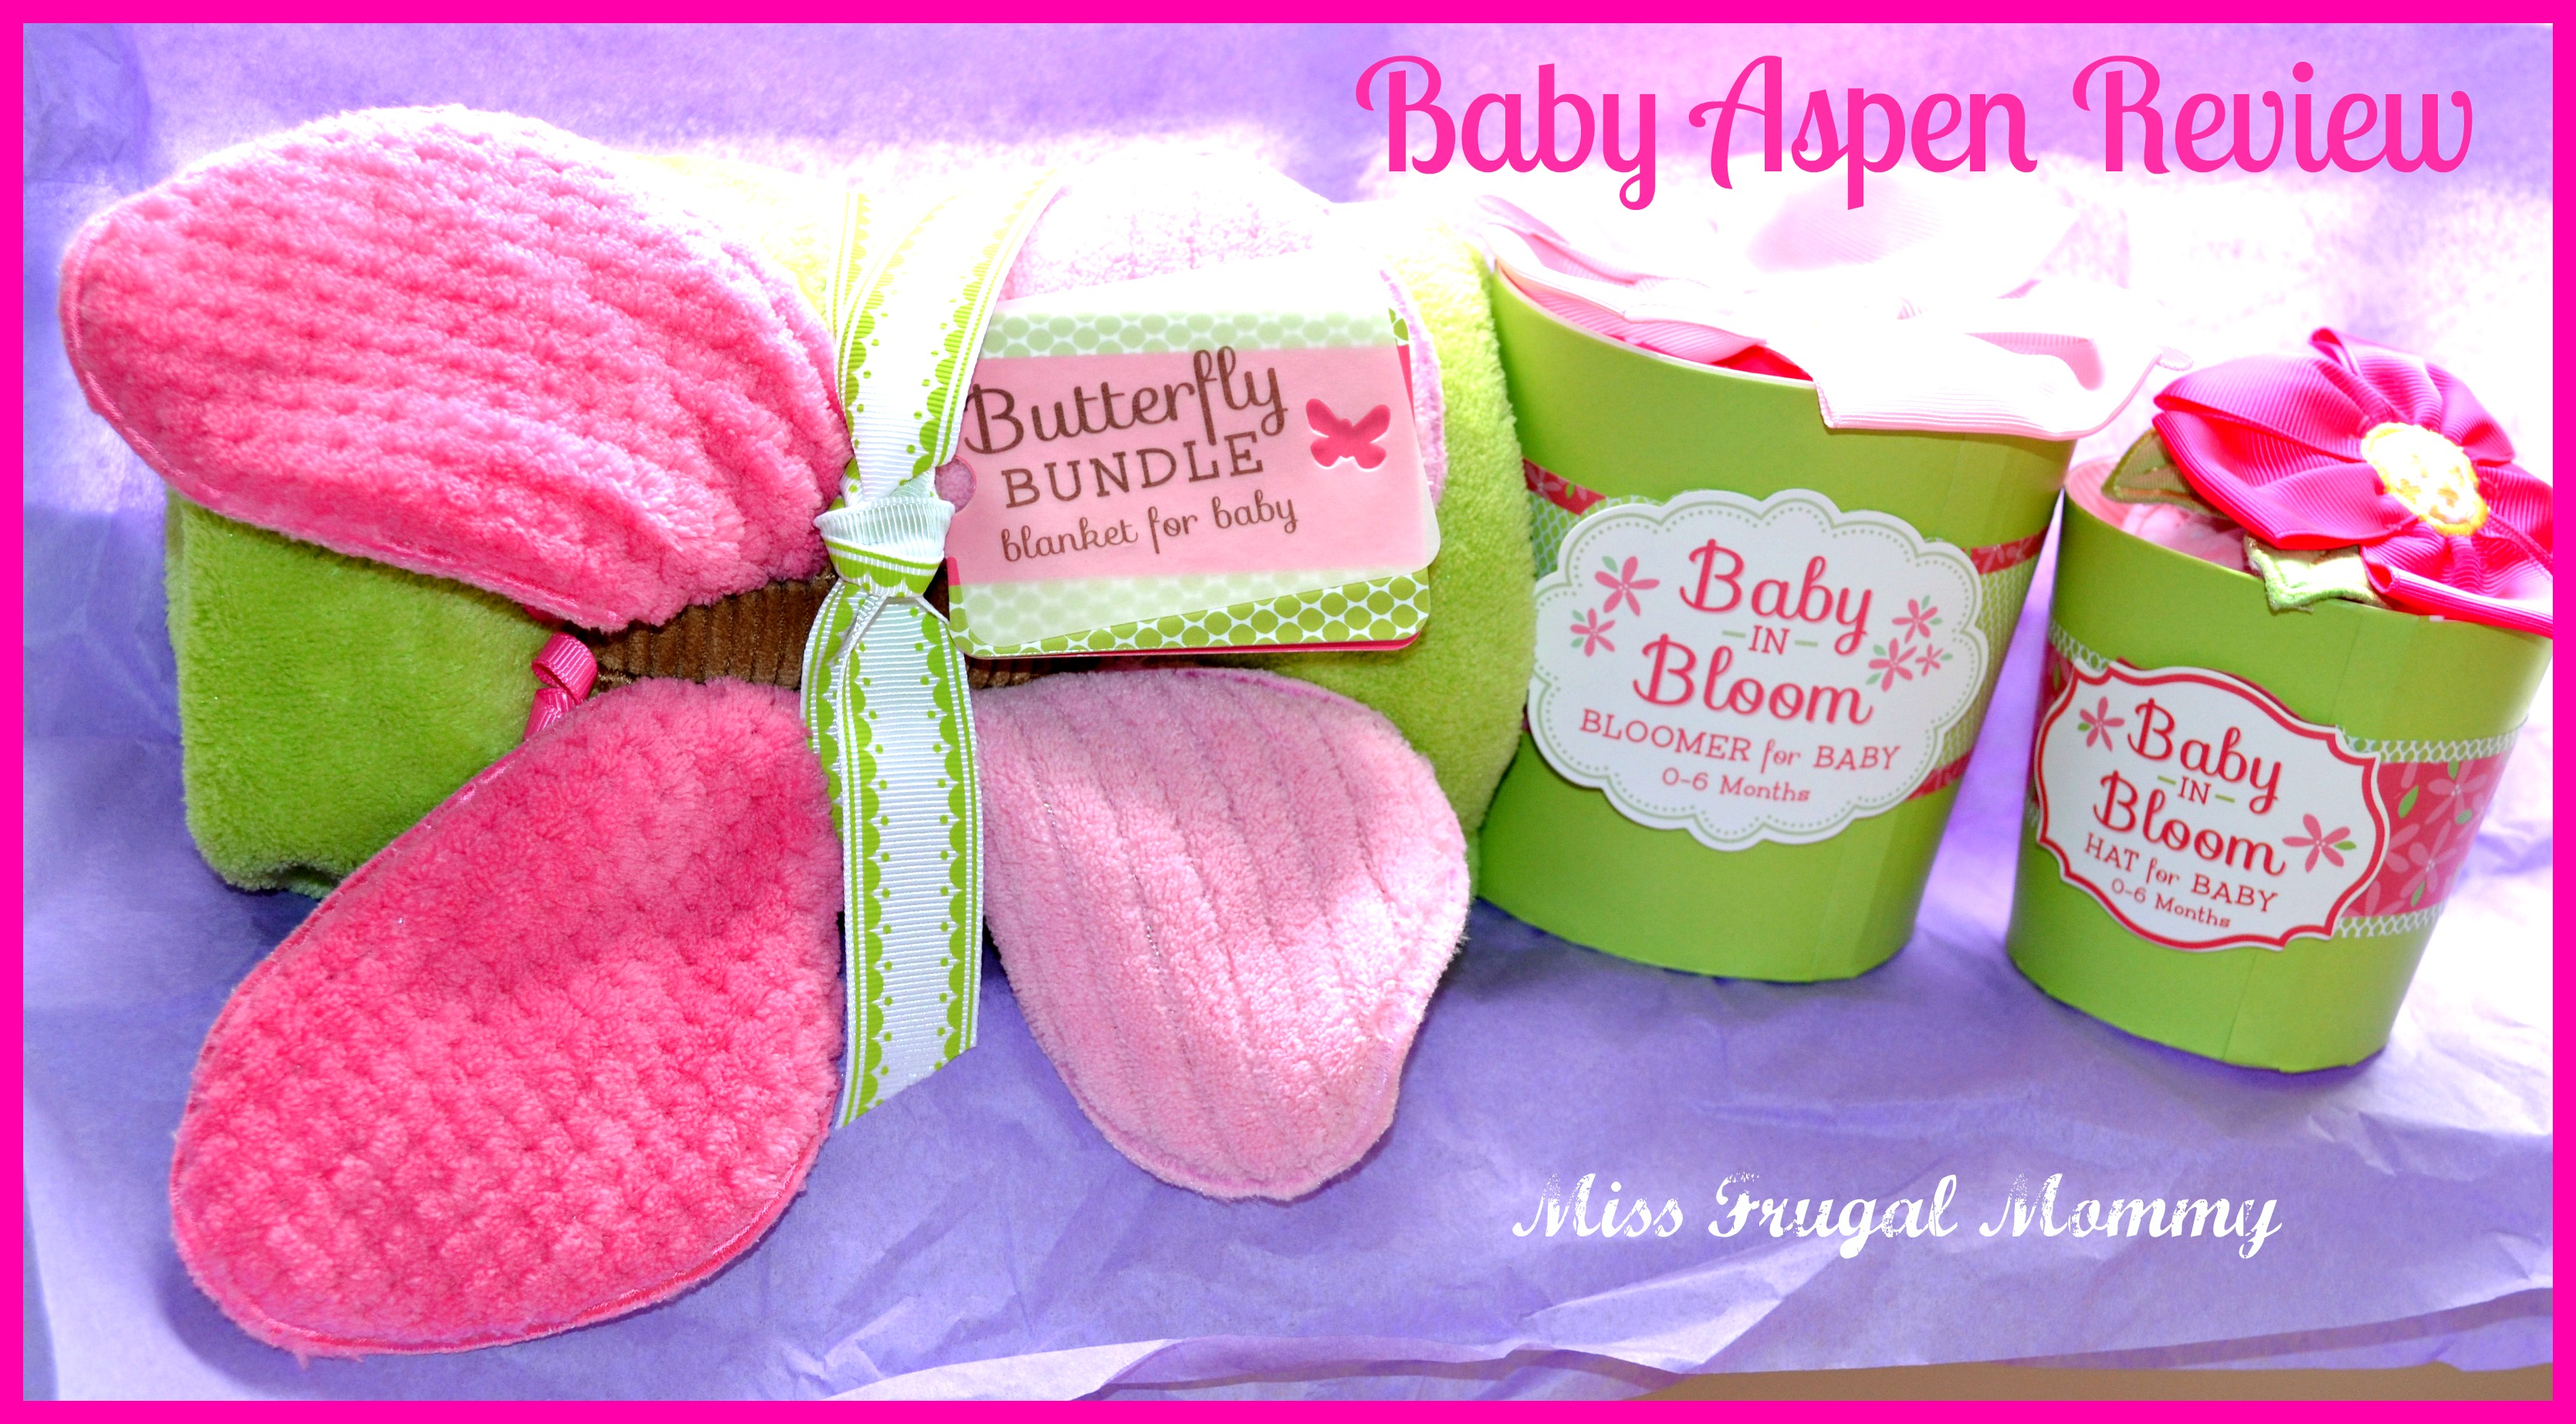 Baby Aspen Review (Getting Ready For Baby Gift Guide)